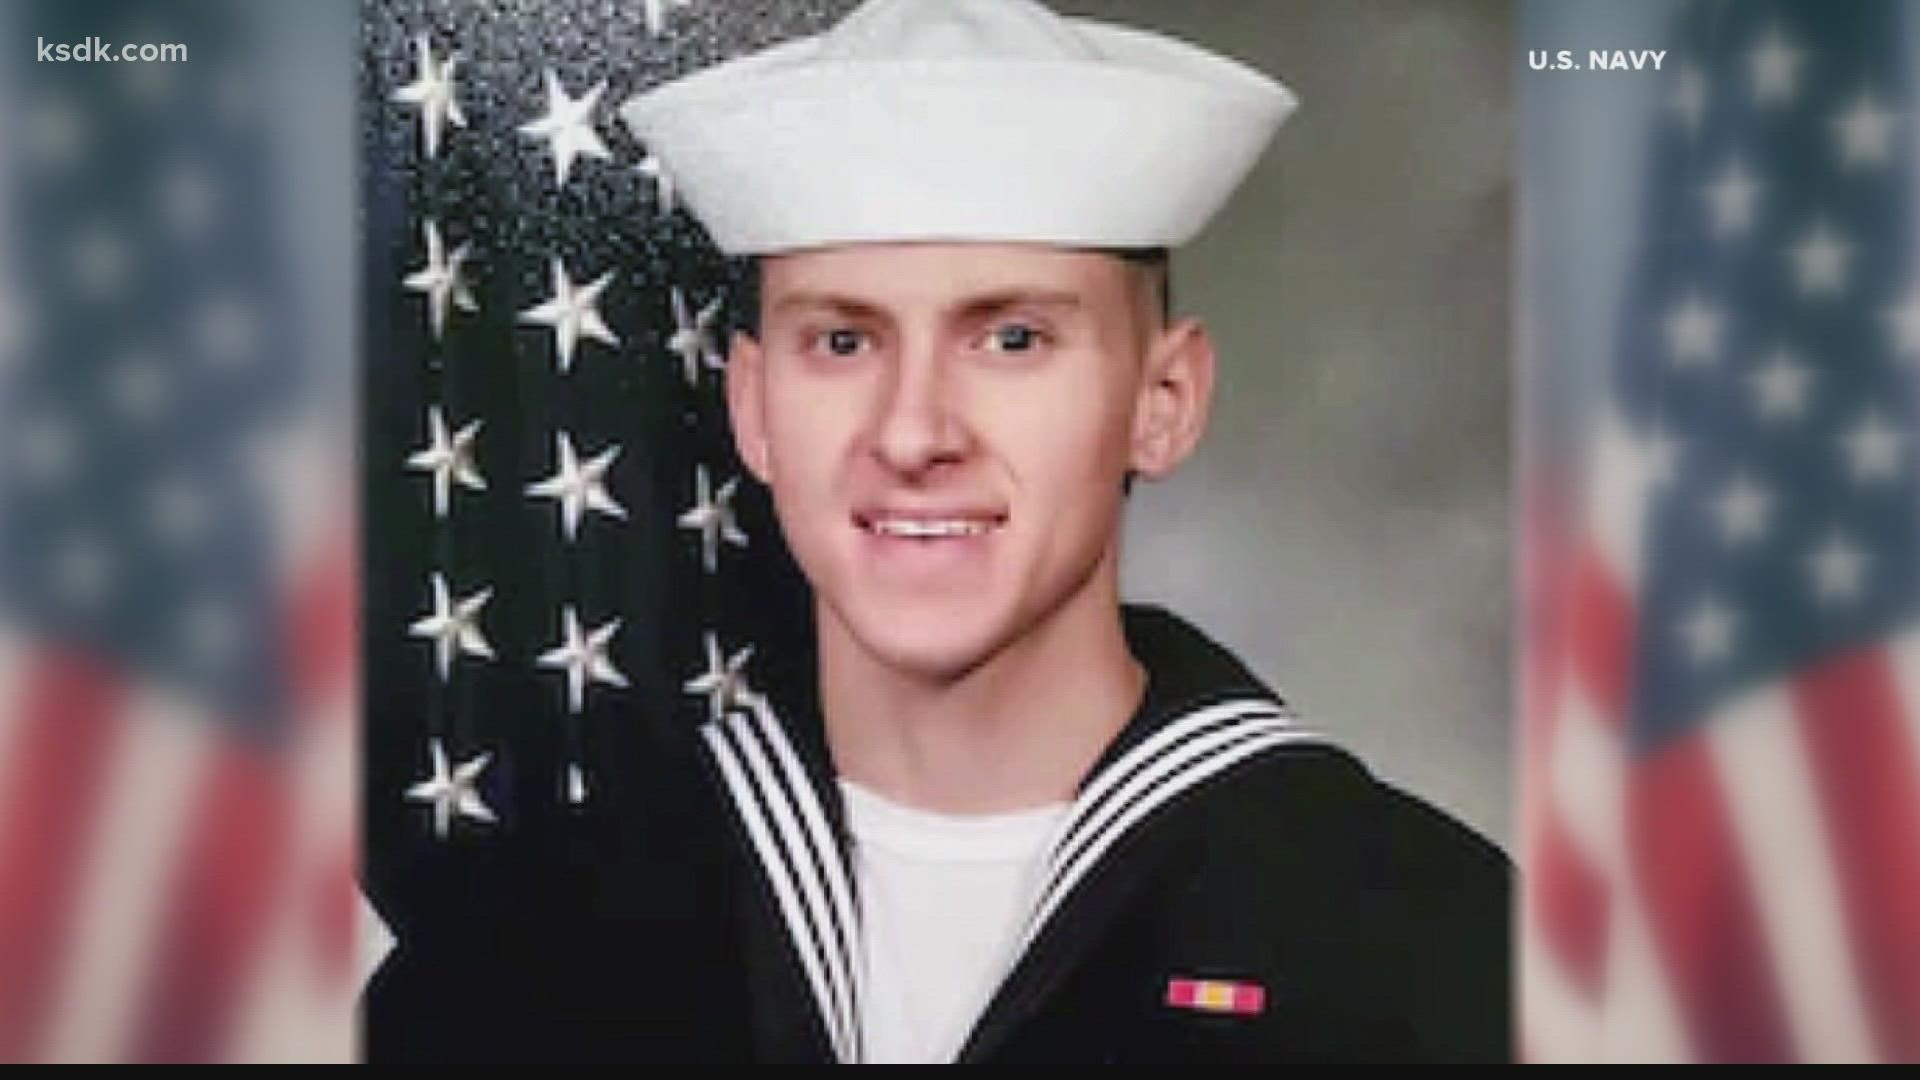 On Friday, a fallen sailor from St. Louis will is returning home.